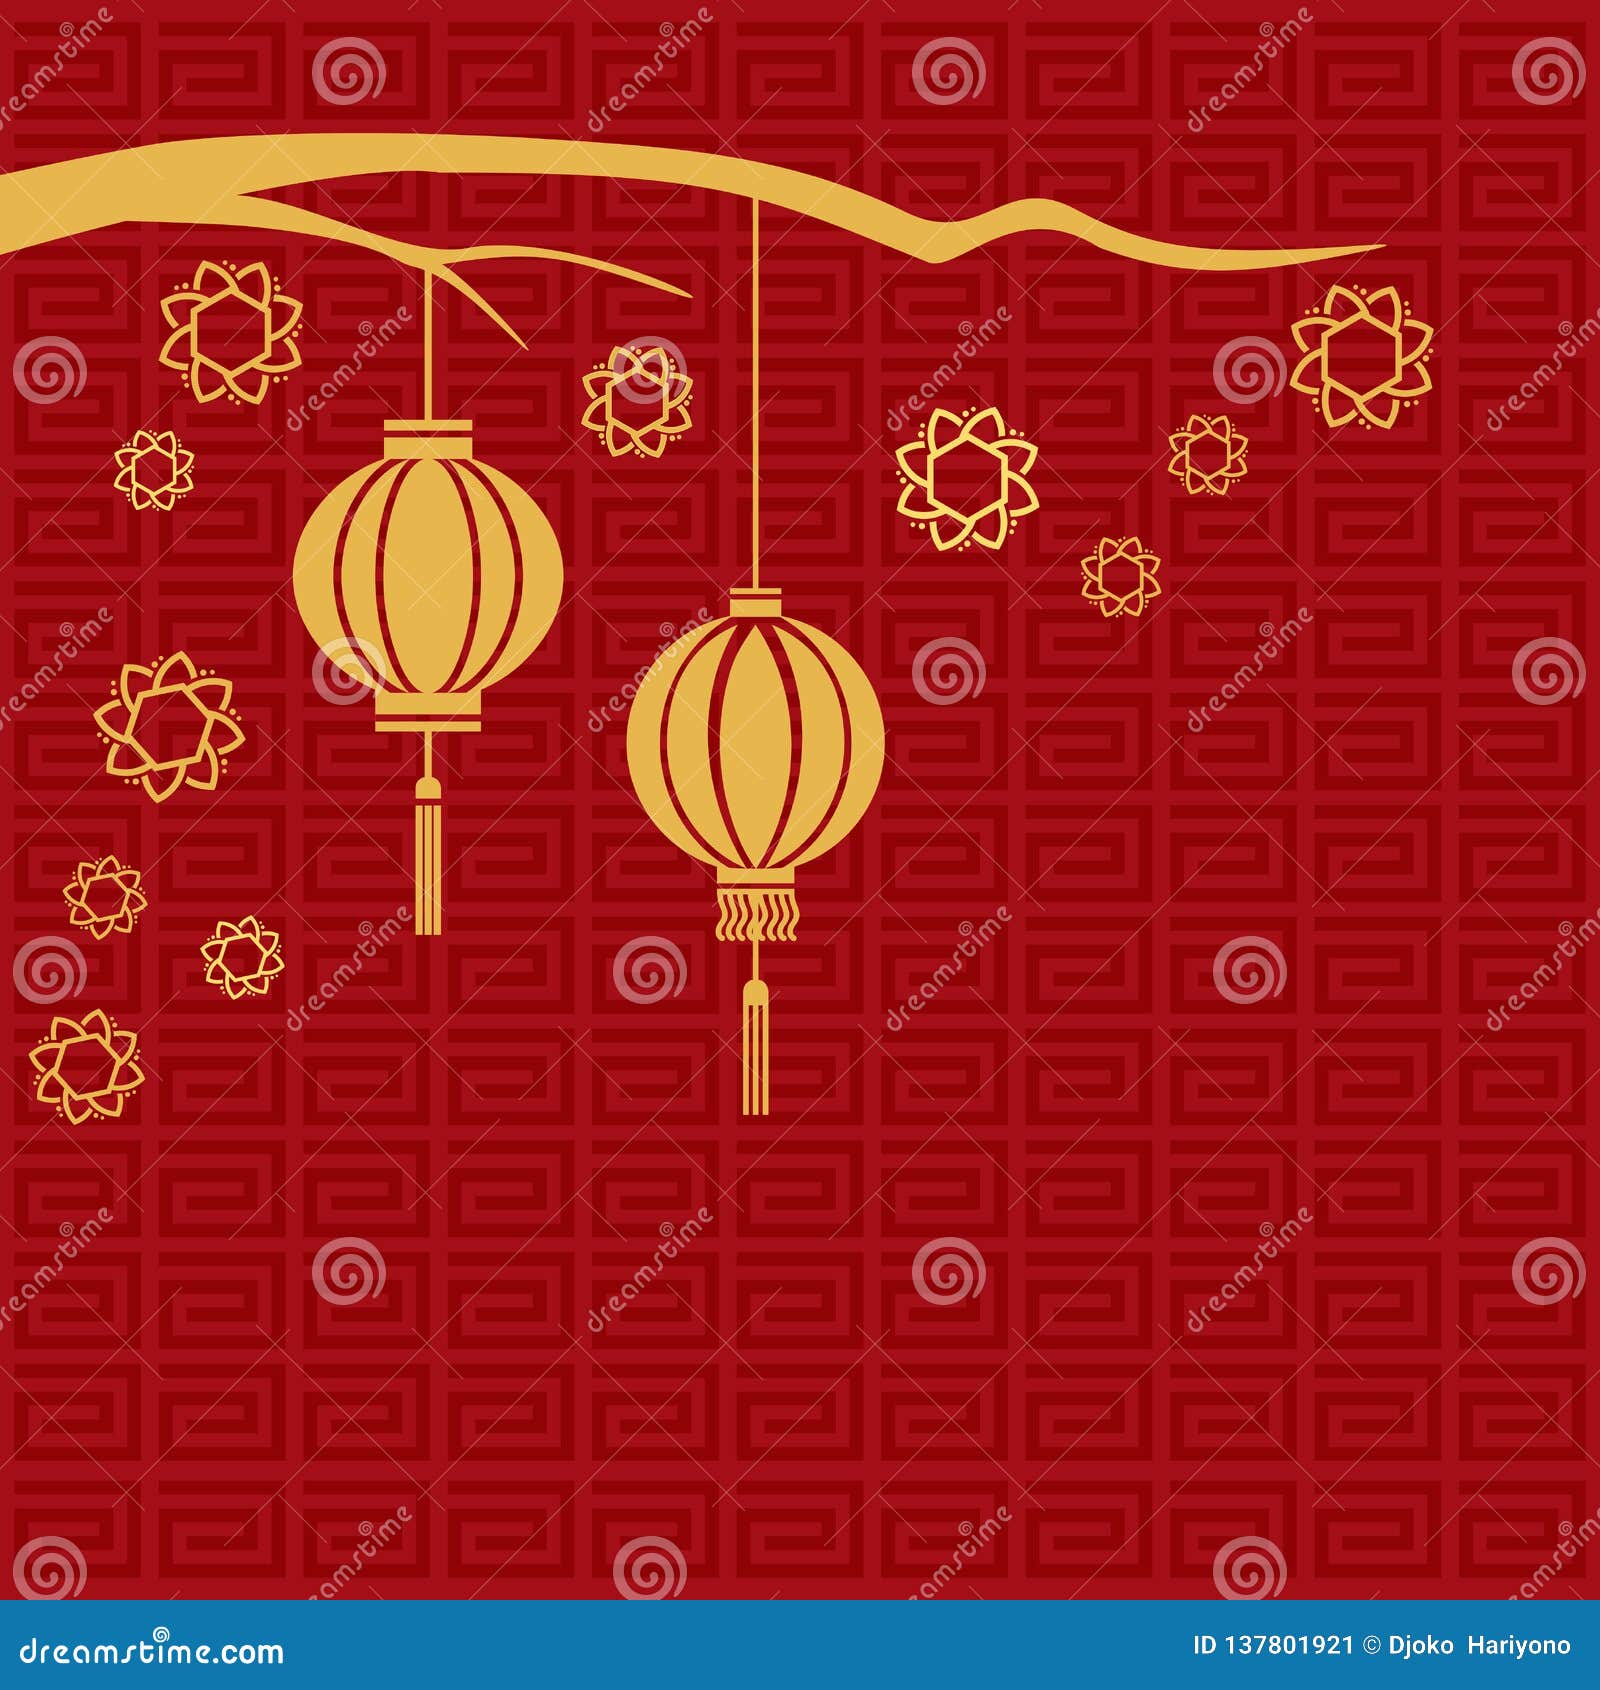 Chinese New Year Vector Red Lantern Dragon Background Wallpaper Art Stock  Vector - Illustration of china, blossom: 137801921